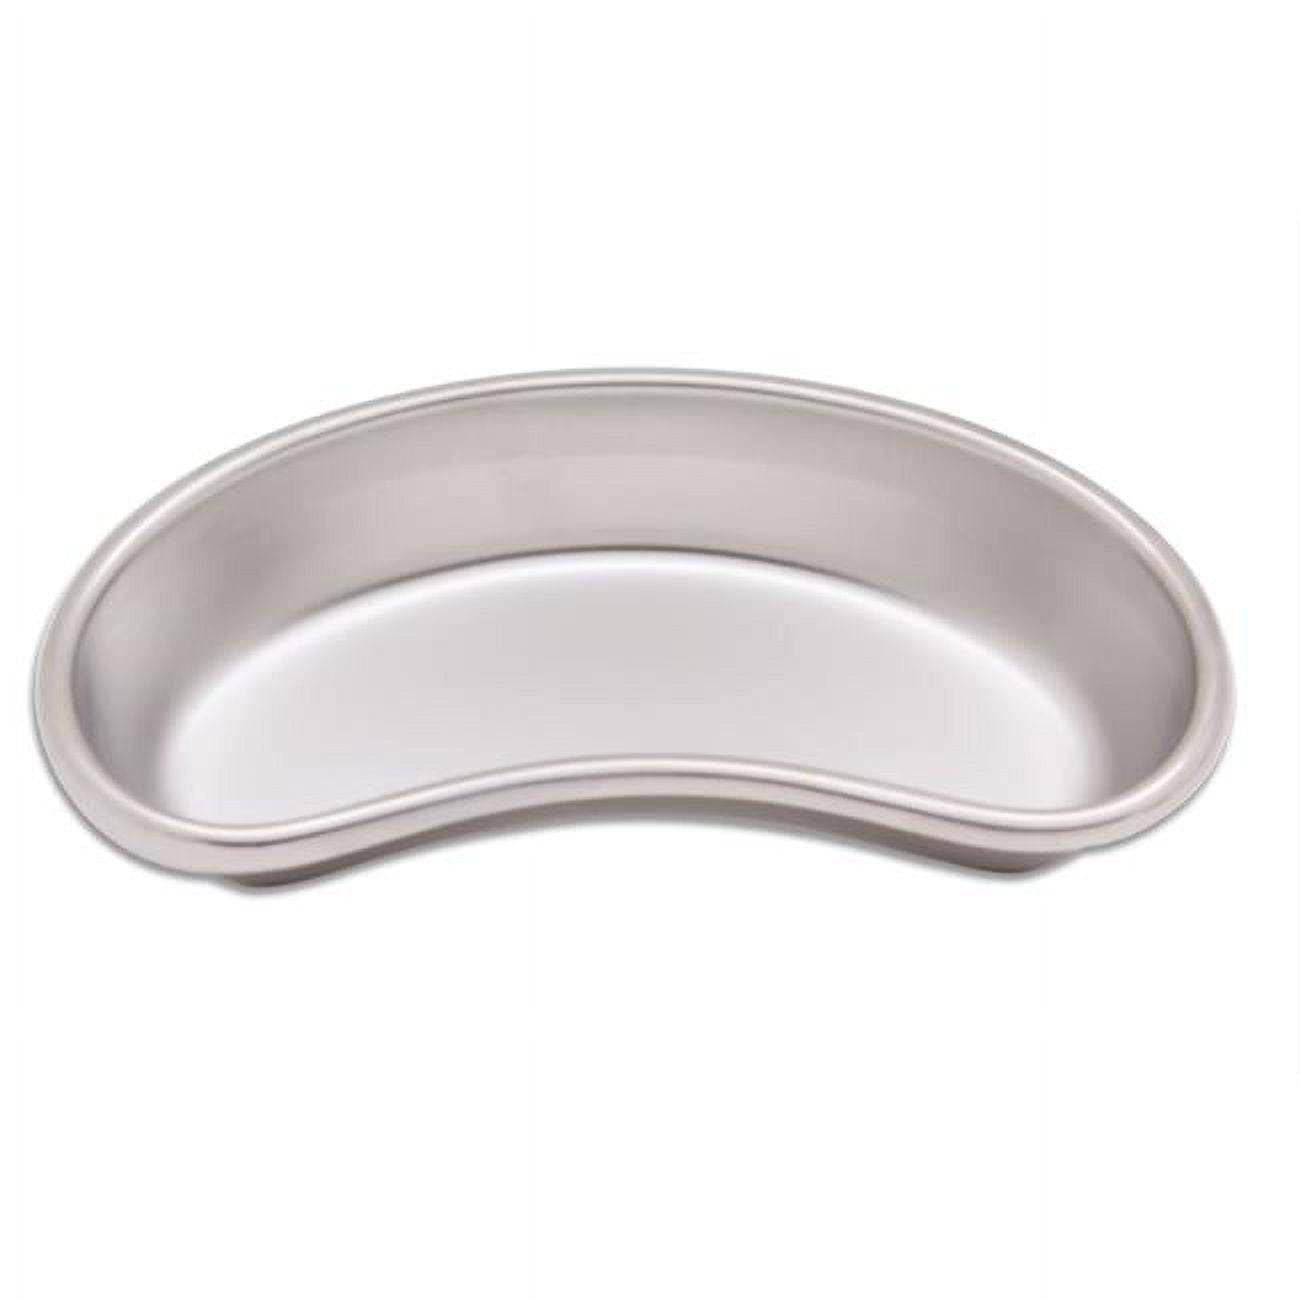 Picture of Tech Med 4230 6 in. 12 oz Emesis Basin, Stainless Steel